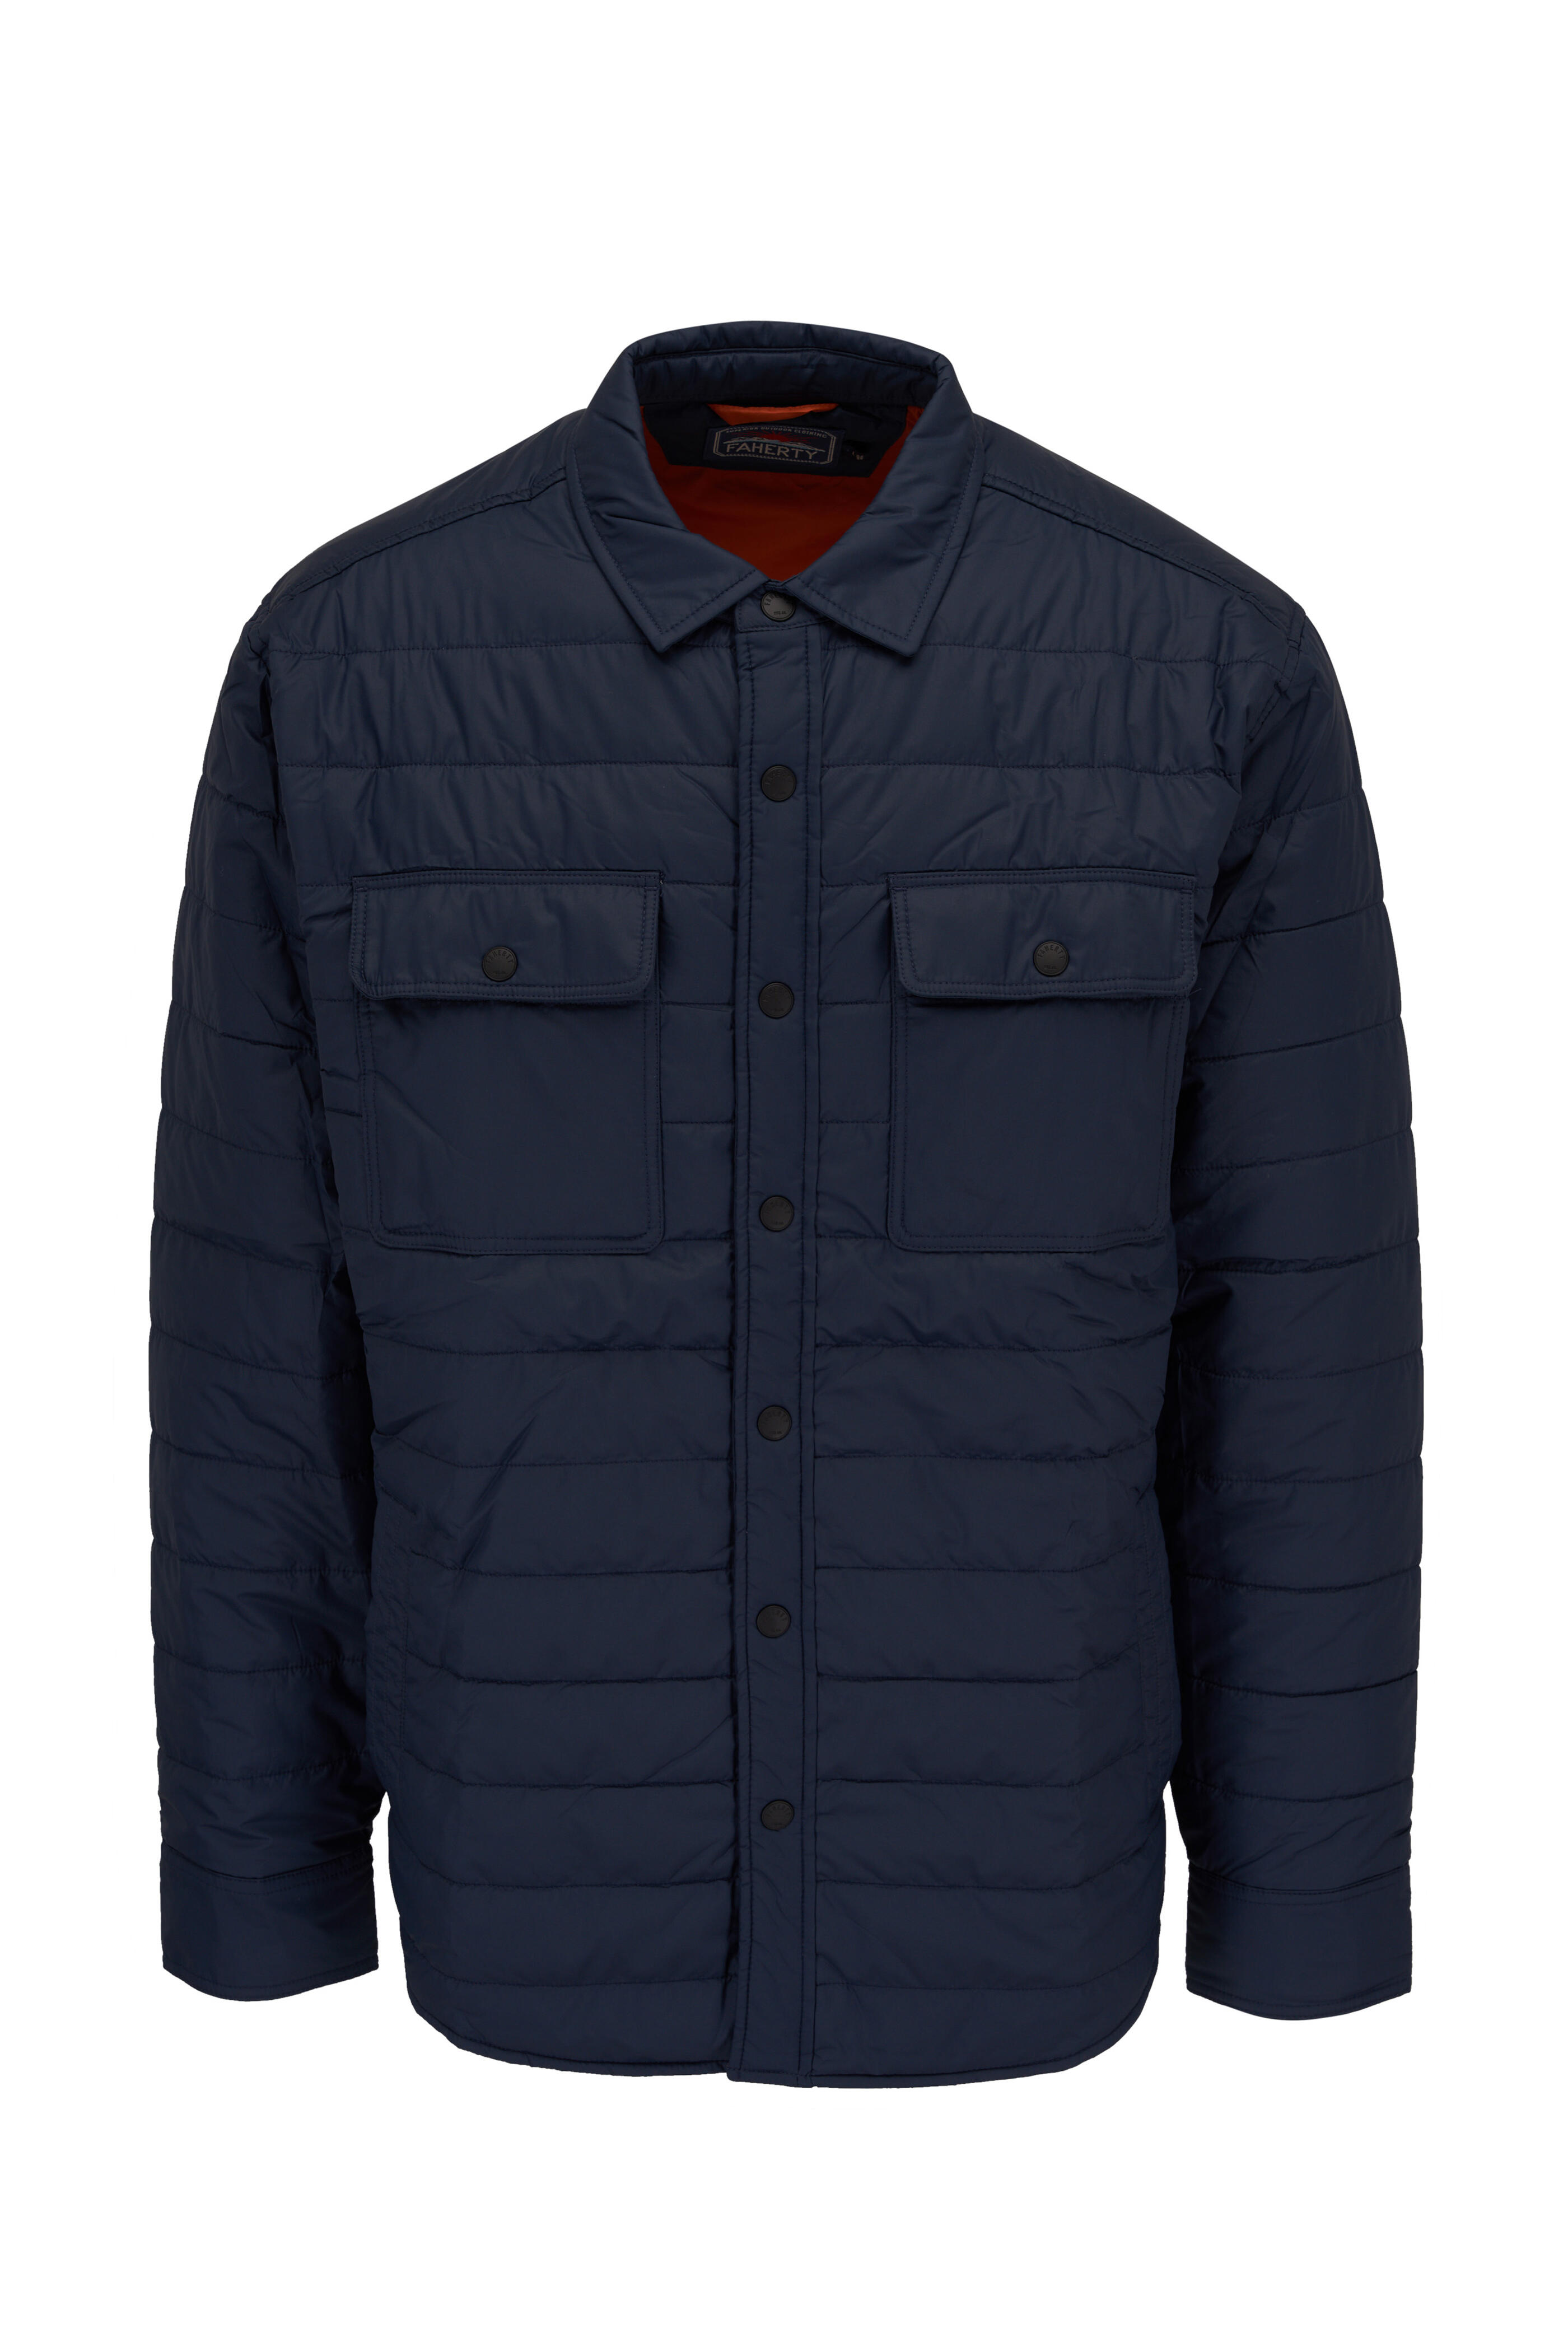 Faherty Brand - Atmosphere Navy Button Down Quilted Shacket